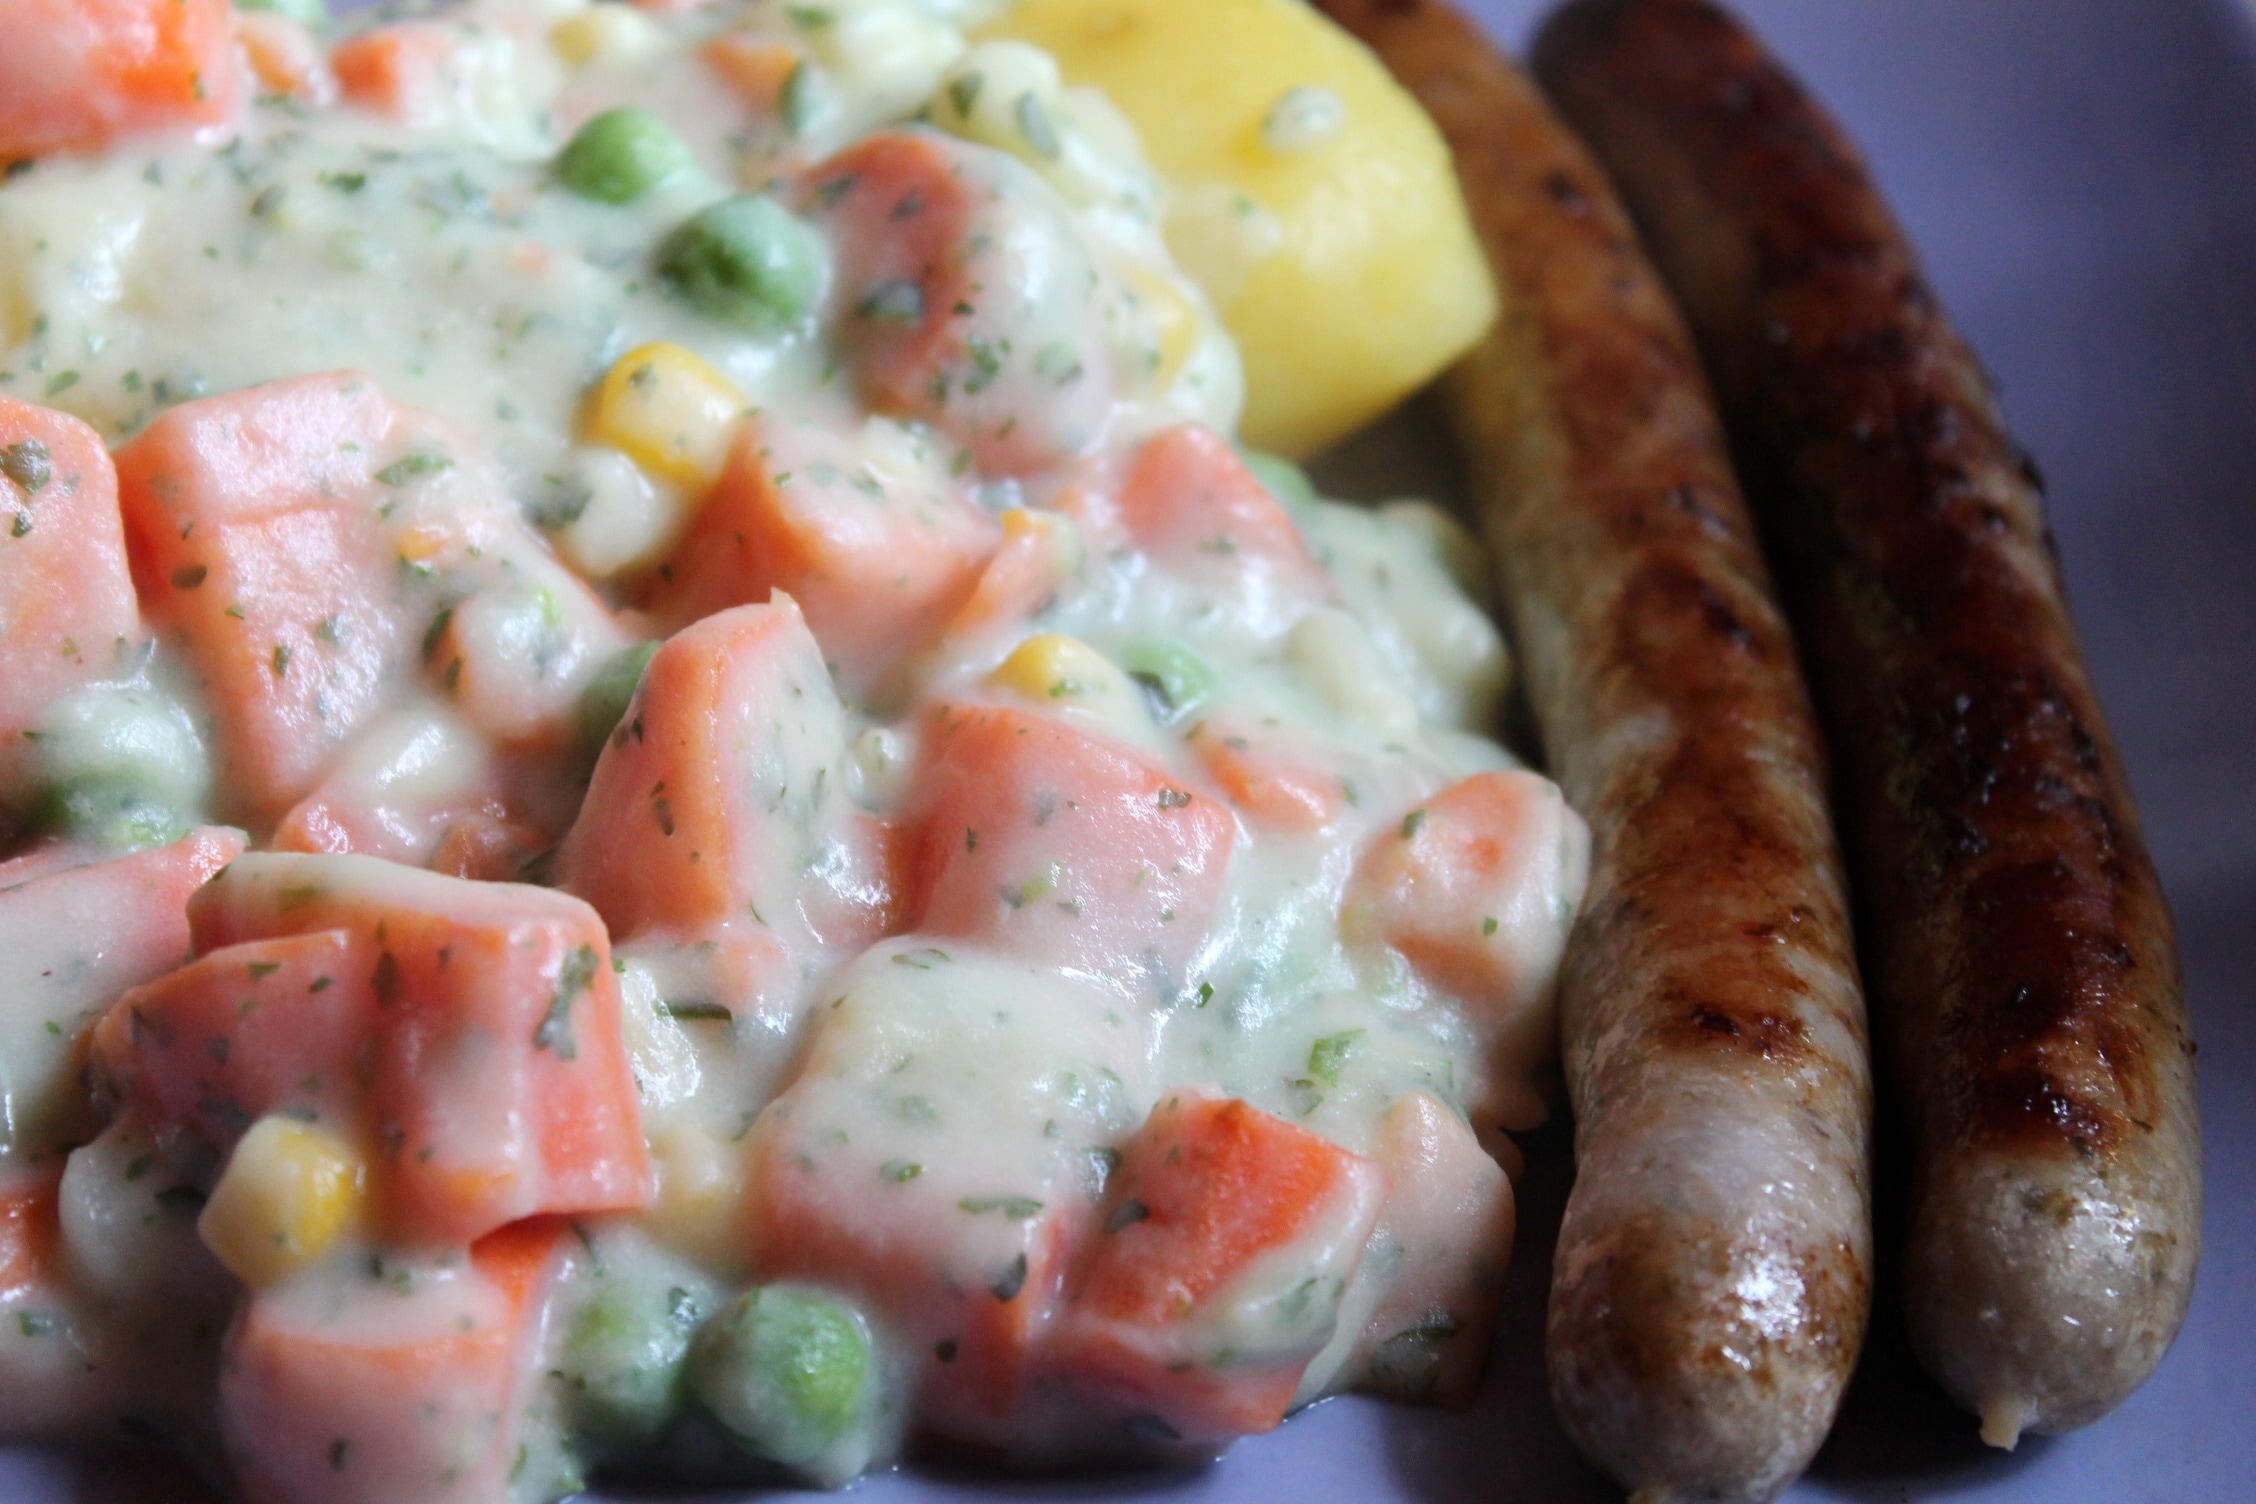 vegetable salad and 2 sausages